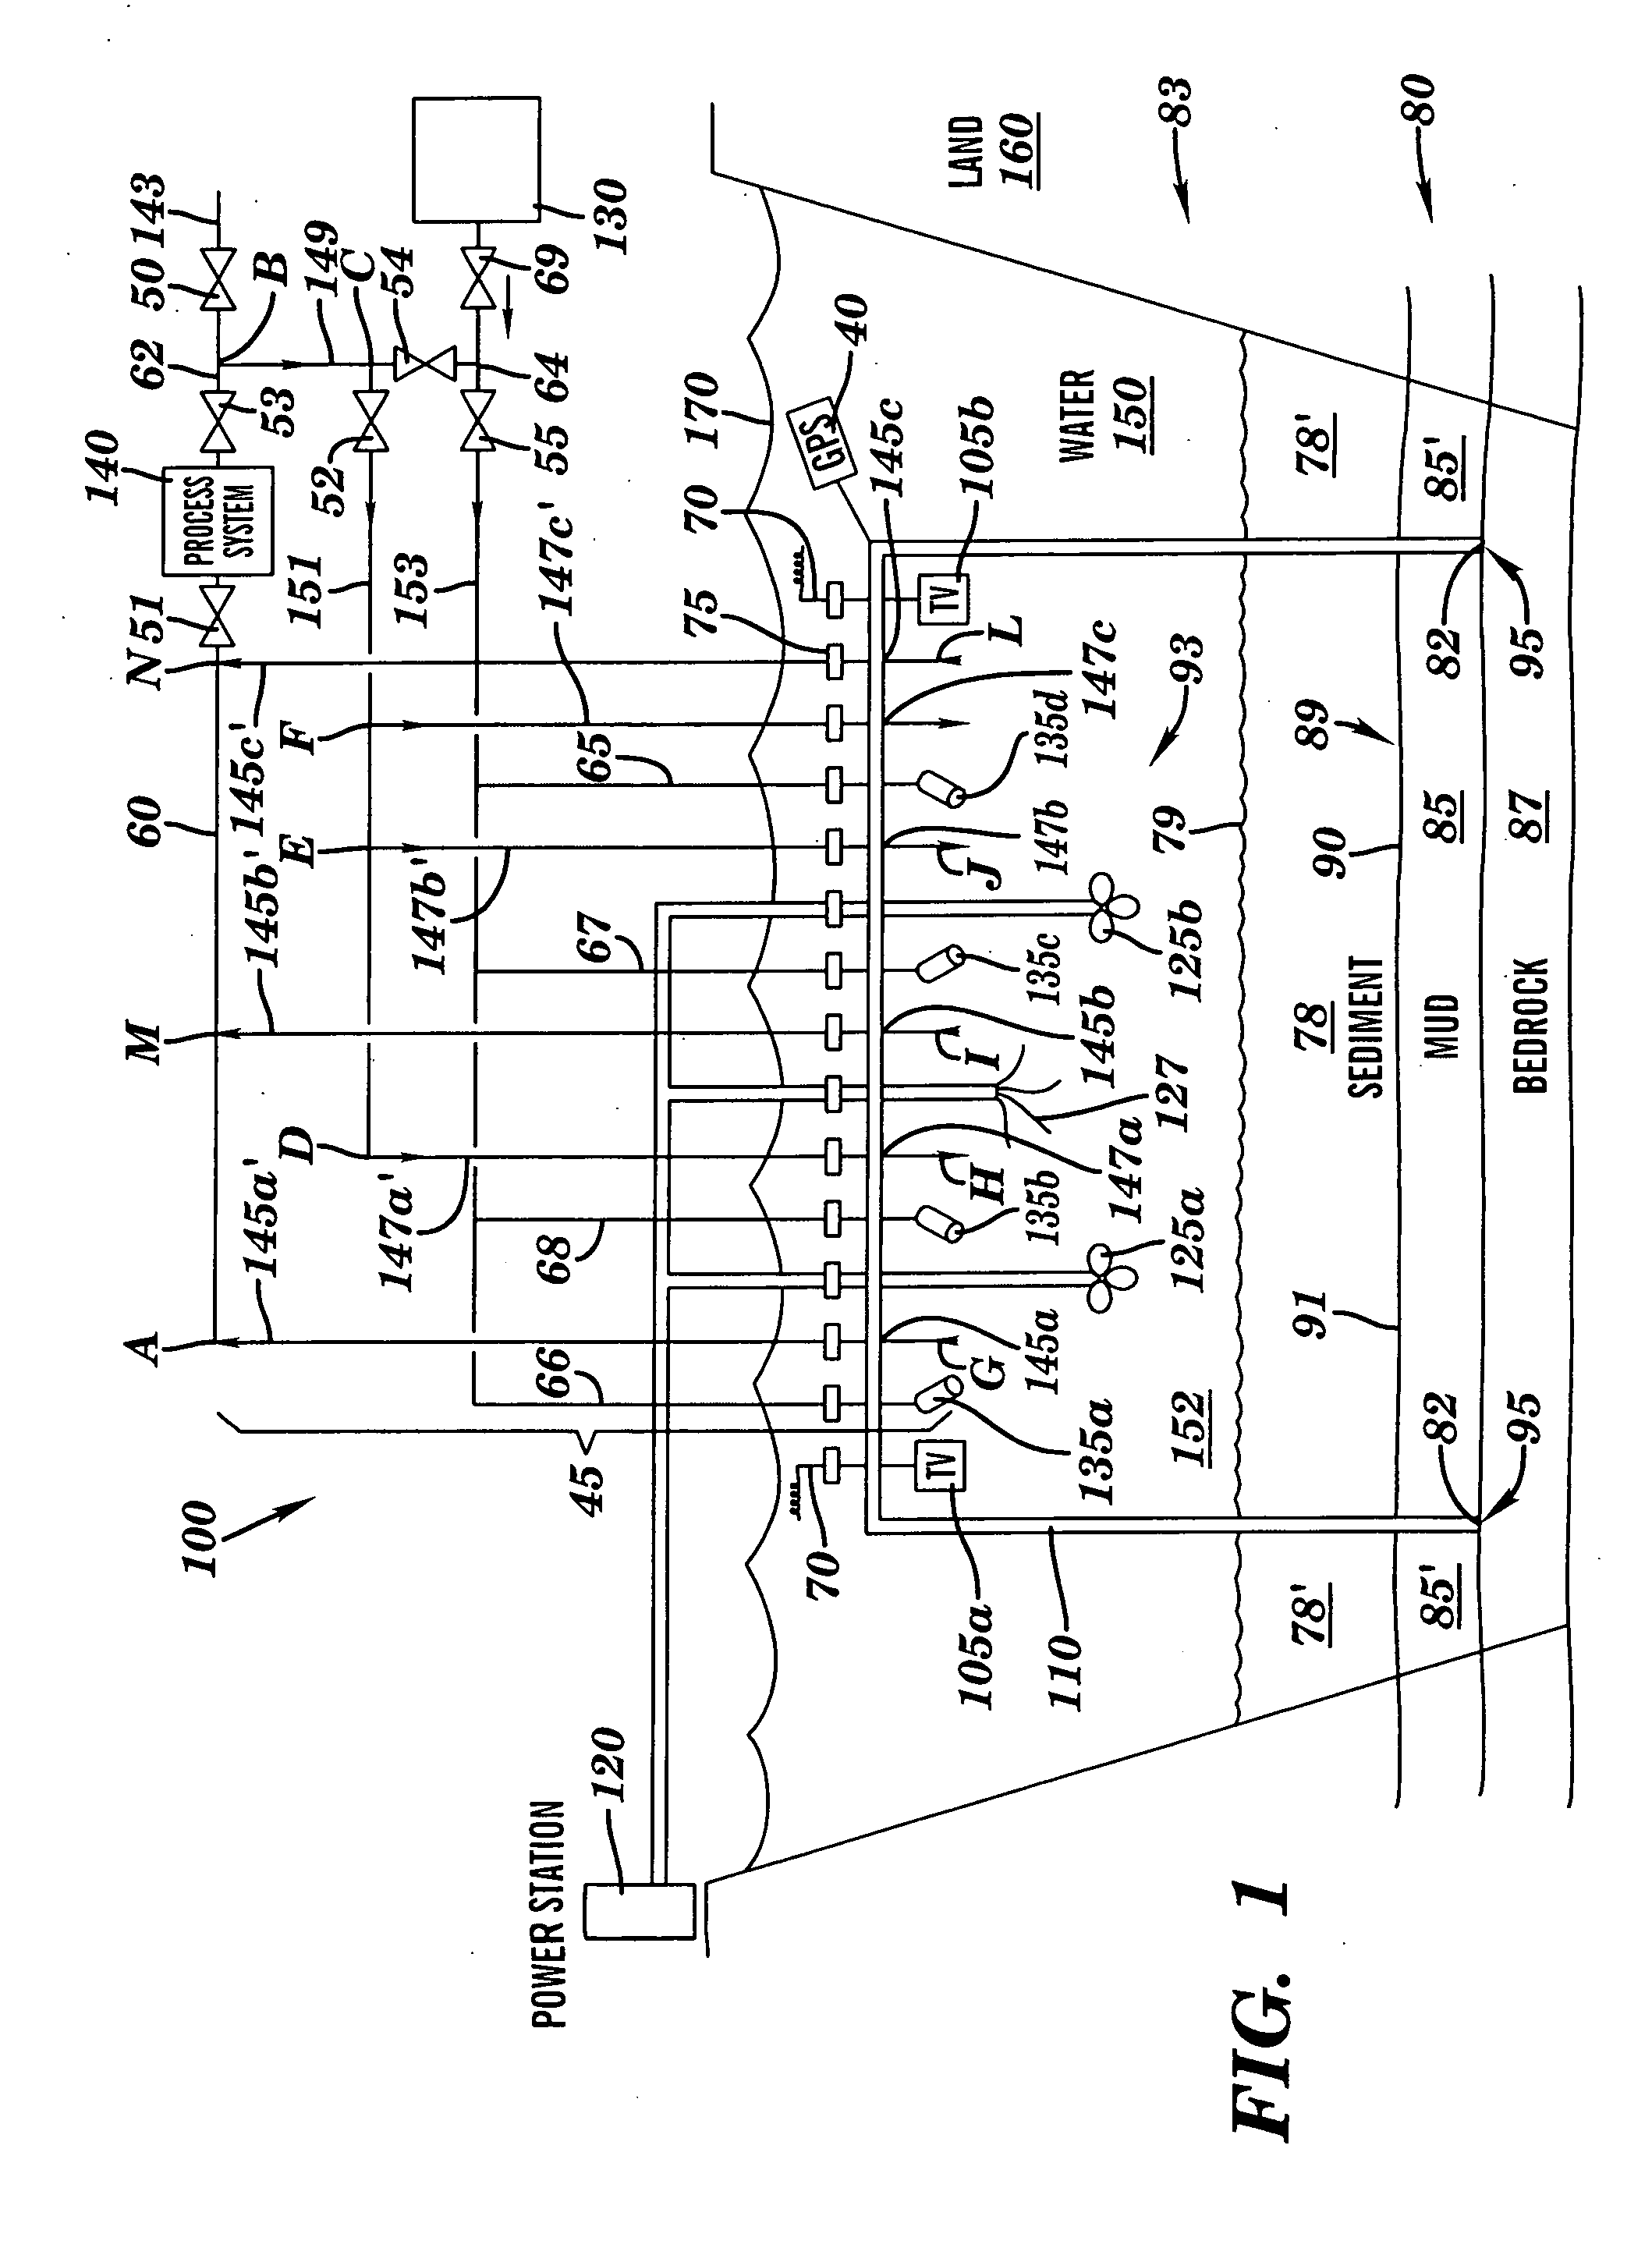 Apparatus, system and method for remediation of contamination